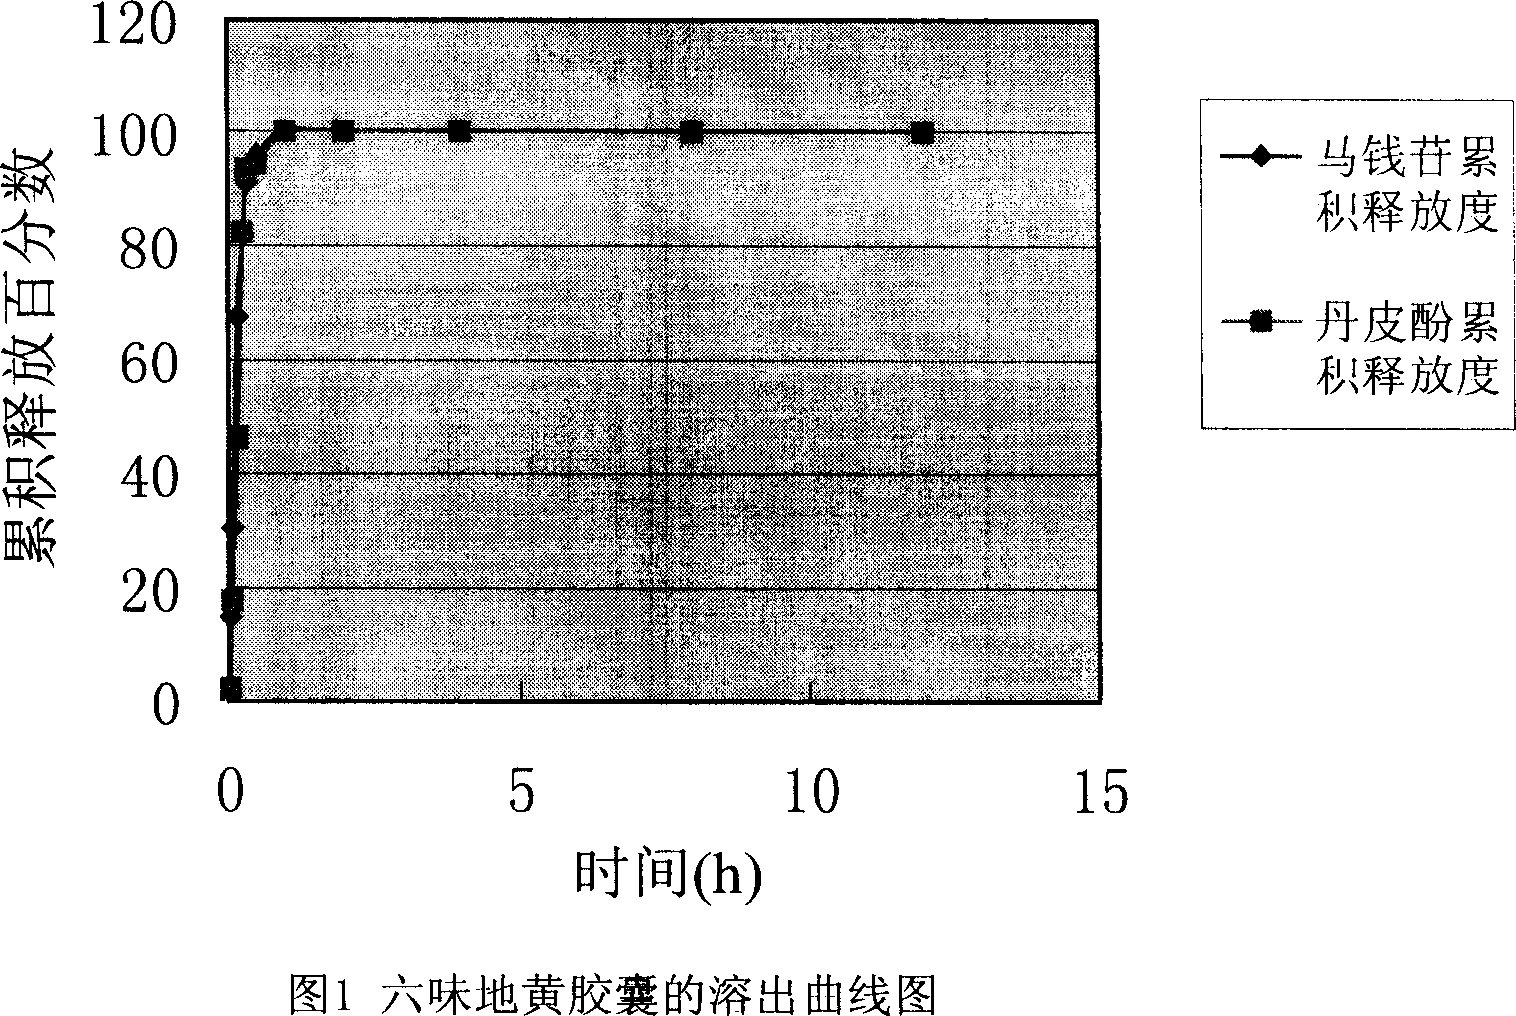 Osmotic pump type controlled release preparation of liuweidihuang or its adjusted formula extract and its preparing method